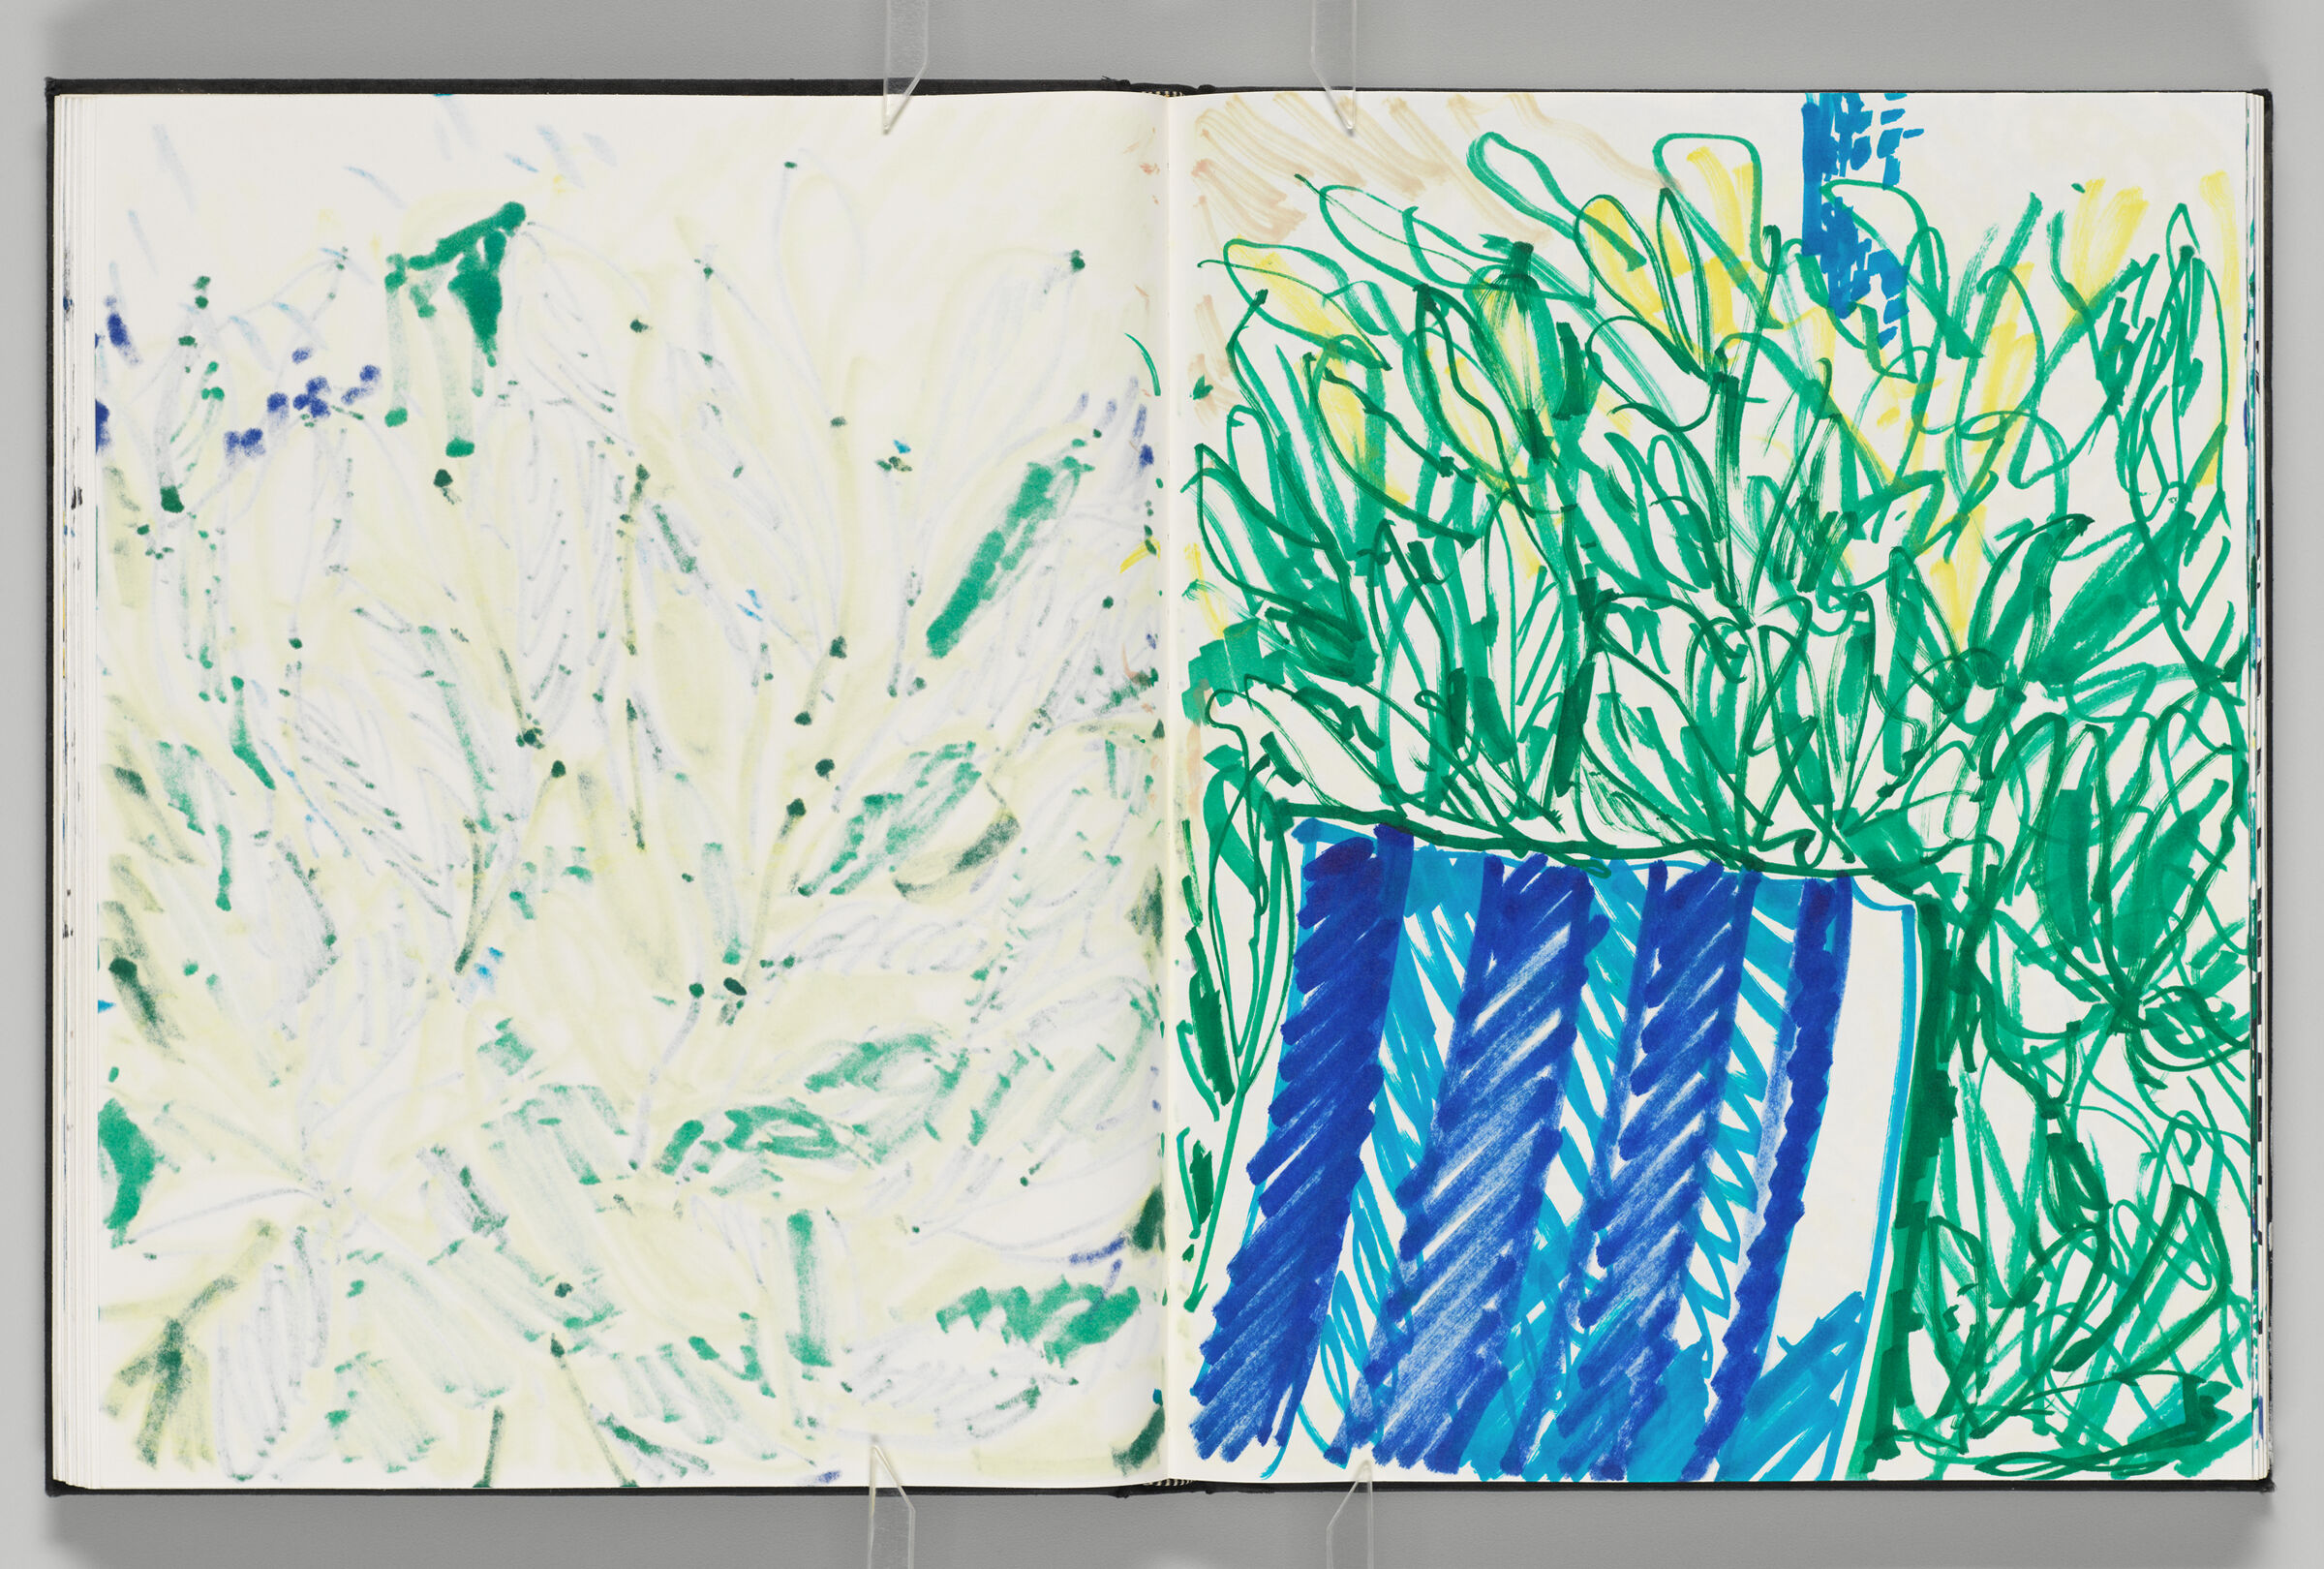 Untitled (Bleed-Through Of Previous Page, Left Page); Untitled (Foliage With Patterned Obejct, Right Page)
